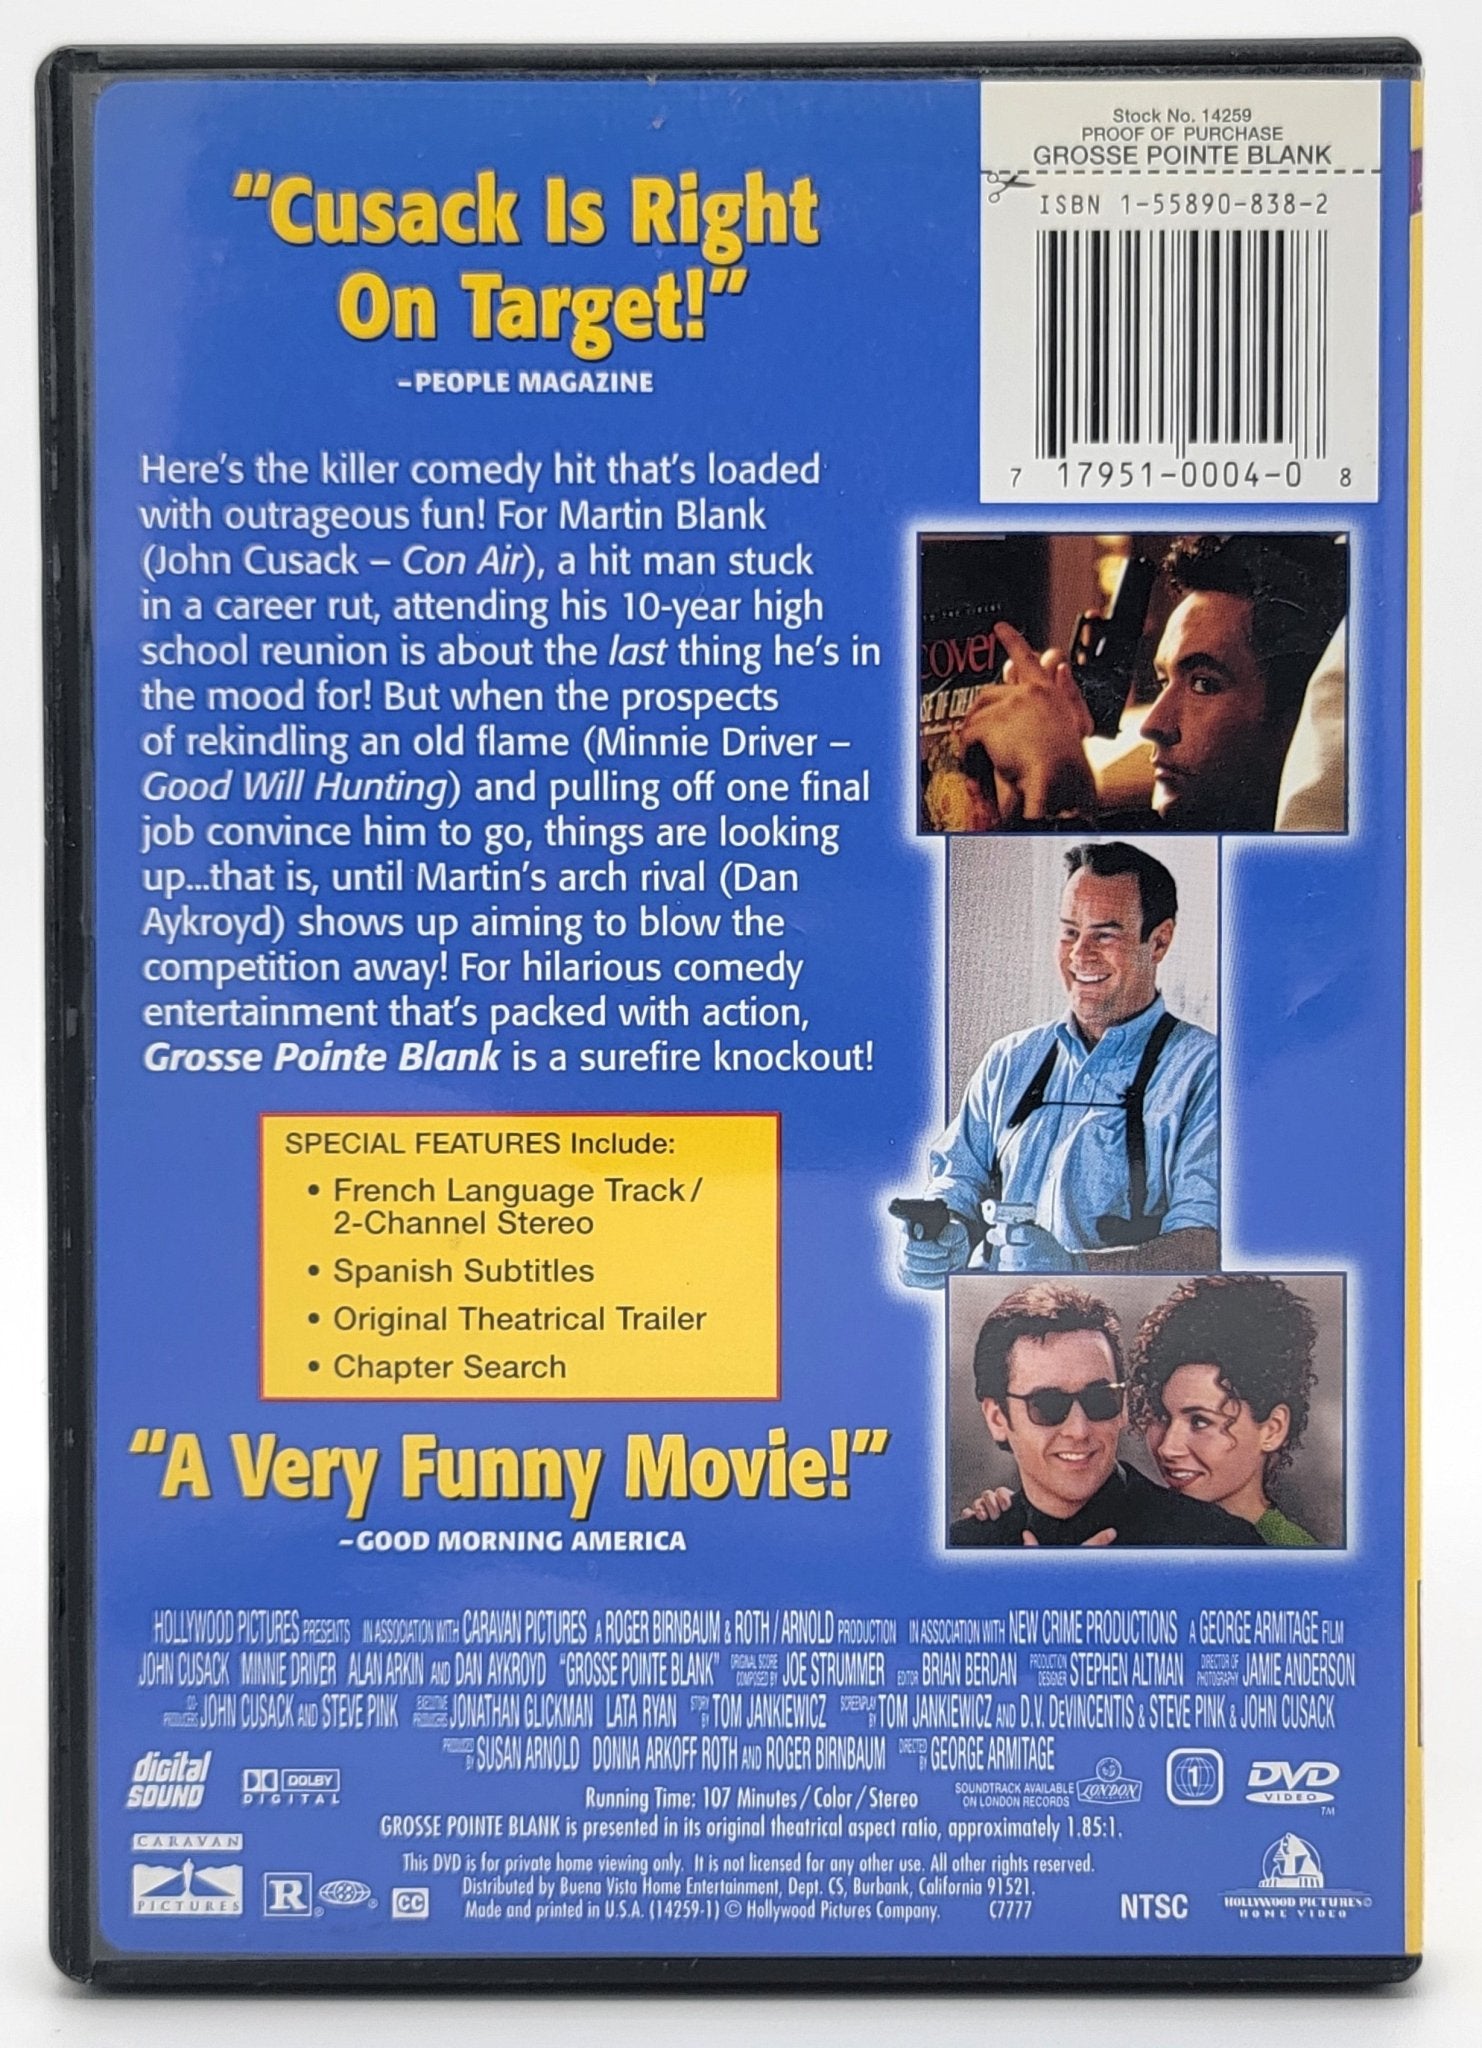 Hollywood Pictures Home Entertainment - Grosse Pointe Blank | DVD | Widescreen - DVD - Steady Bunny Shop